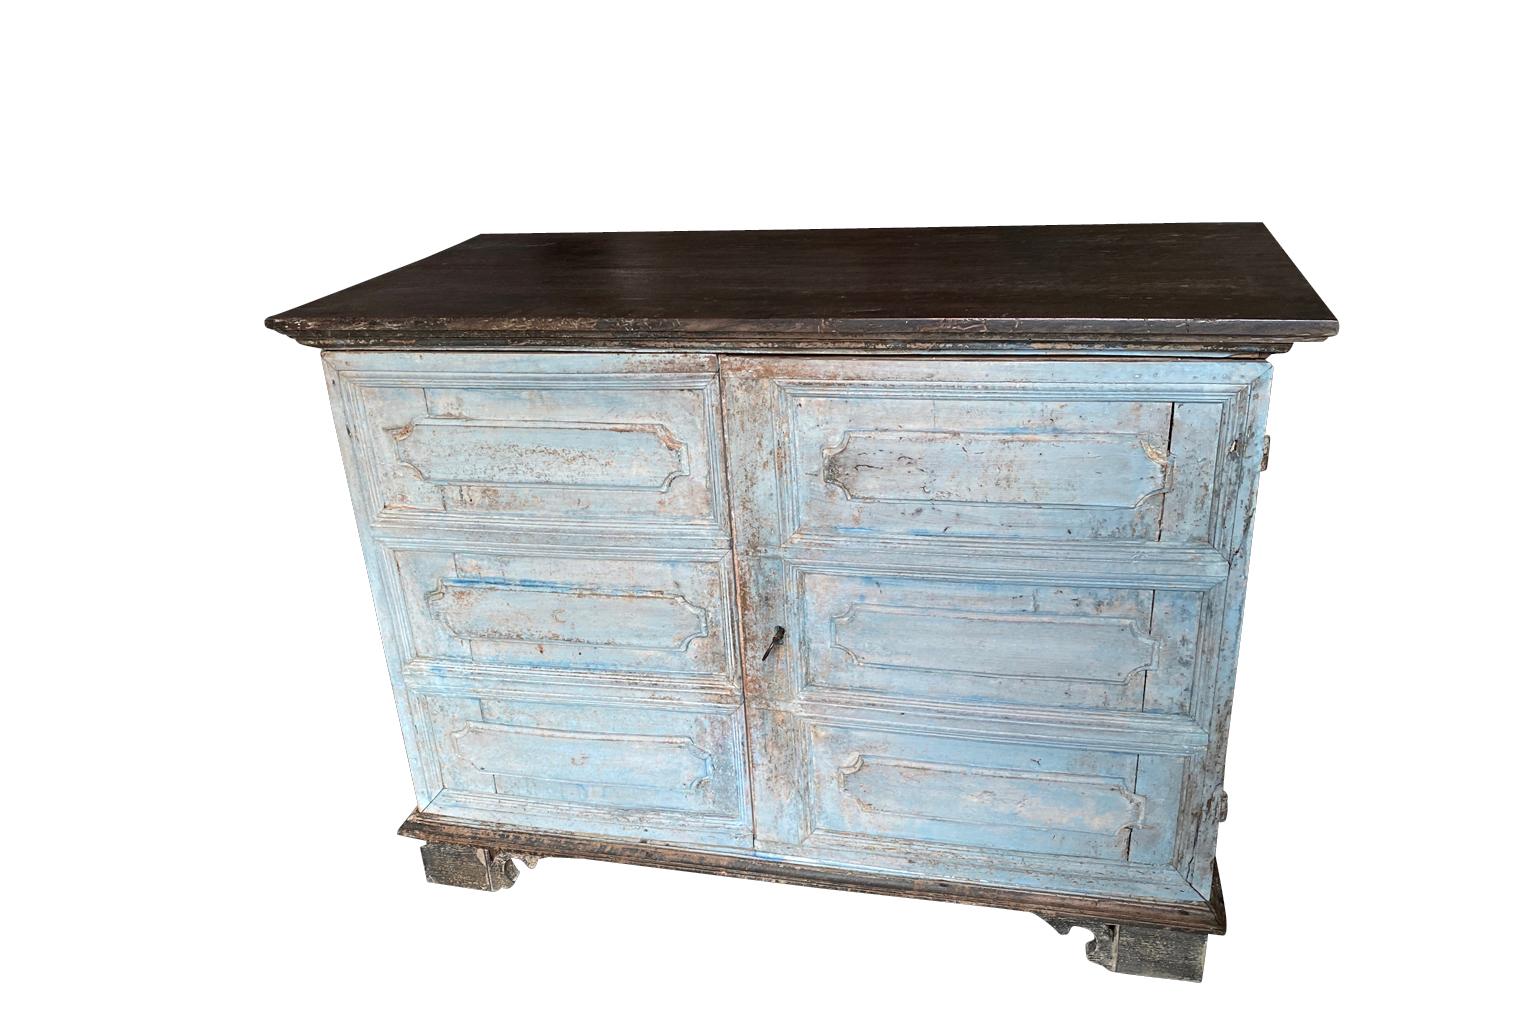 A very elegant mid-18th century Buffet - Commode A Portes from Northern Italy.  Beautifully constructed from painted wood with molded panels to the 2 doors and sides, an interior sliding shelf, raised on bracket feet.  Wonderful finish.  A charming